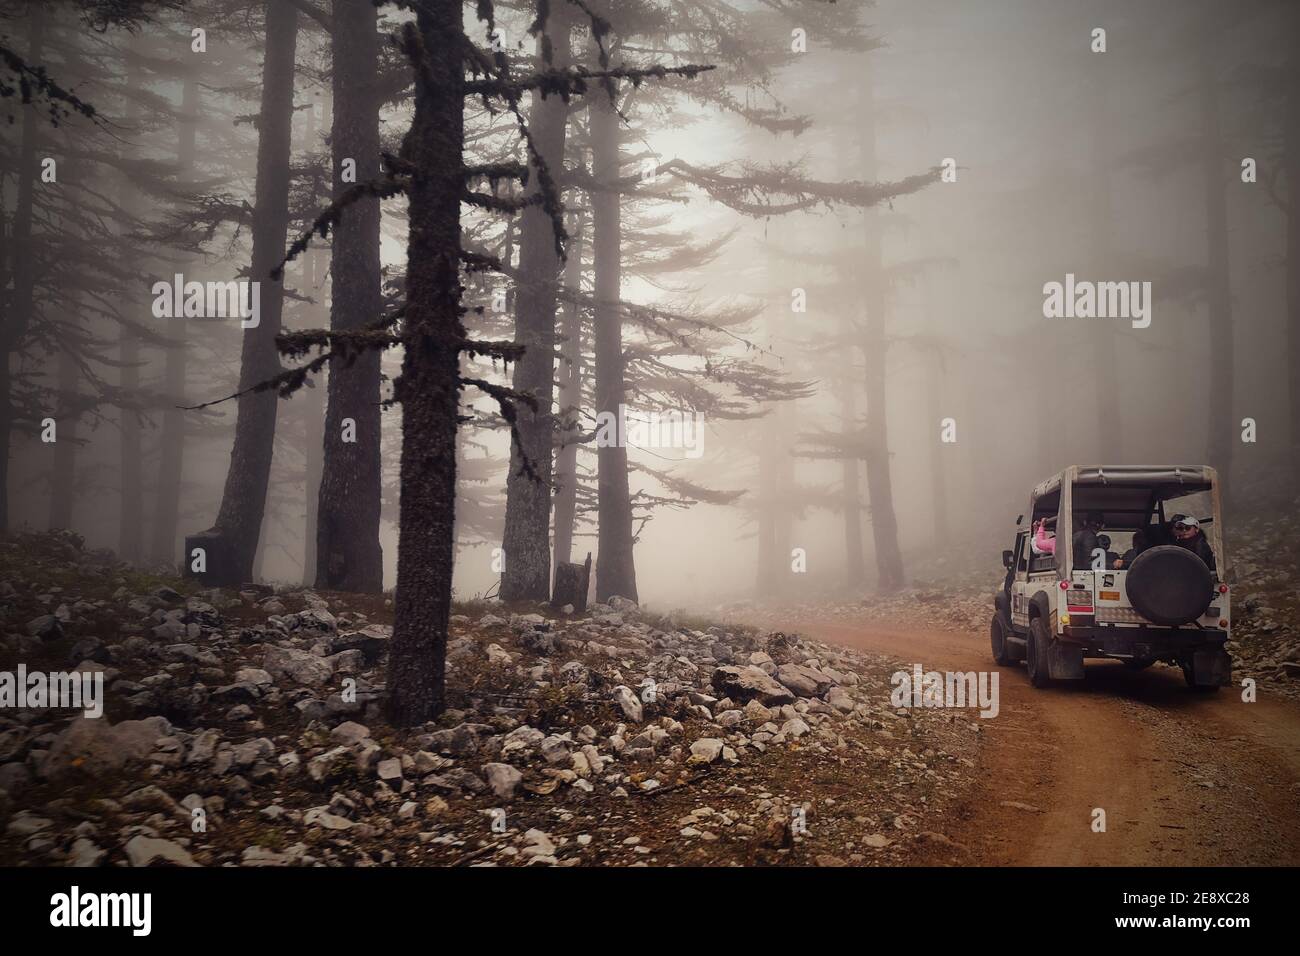 Tourist safari 4x4 vehicles driving through  foggy forest at early misty morning sunrise. Blurred misty country road and hazed dark trees silhouettes Stock Photo